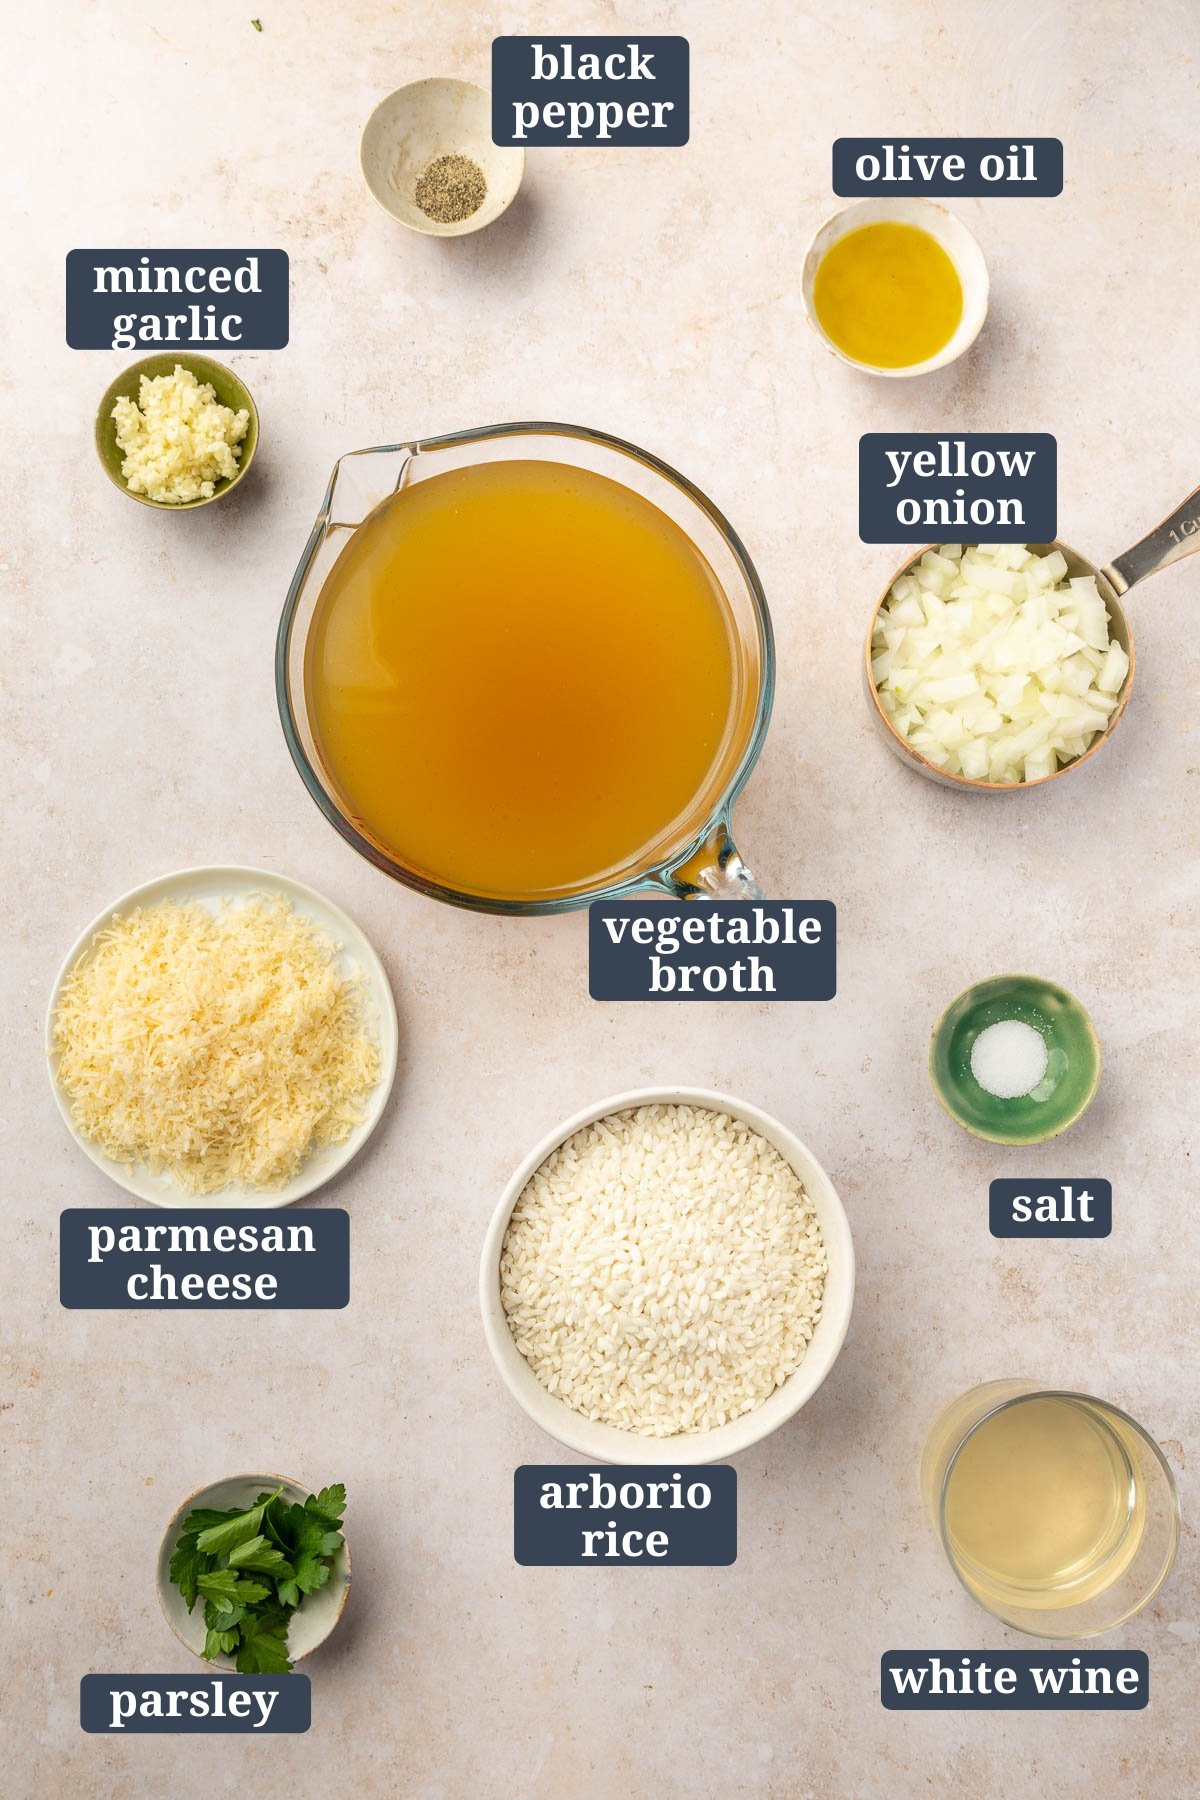 Ingredients in small bowls to make gluten free risotto, including black pepper, minced garlic, olive oil, yellow onion, vegetable broth, parmesan cheese, arborio rice, salt, parsley and white wine with text overlays over each ingredient.